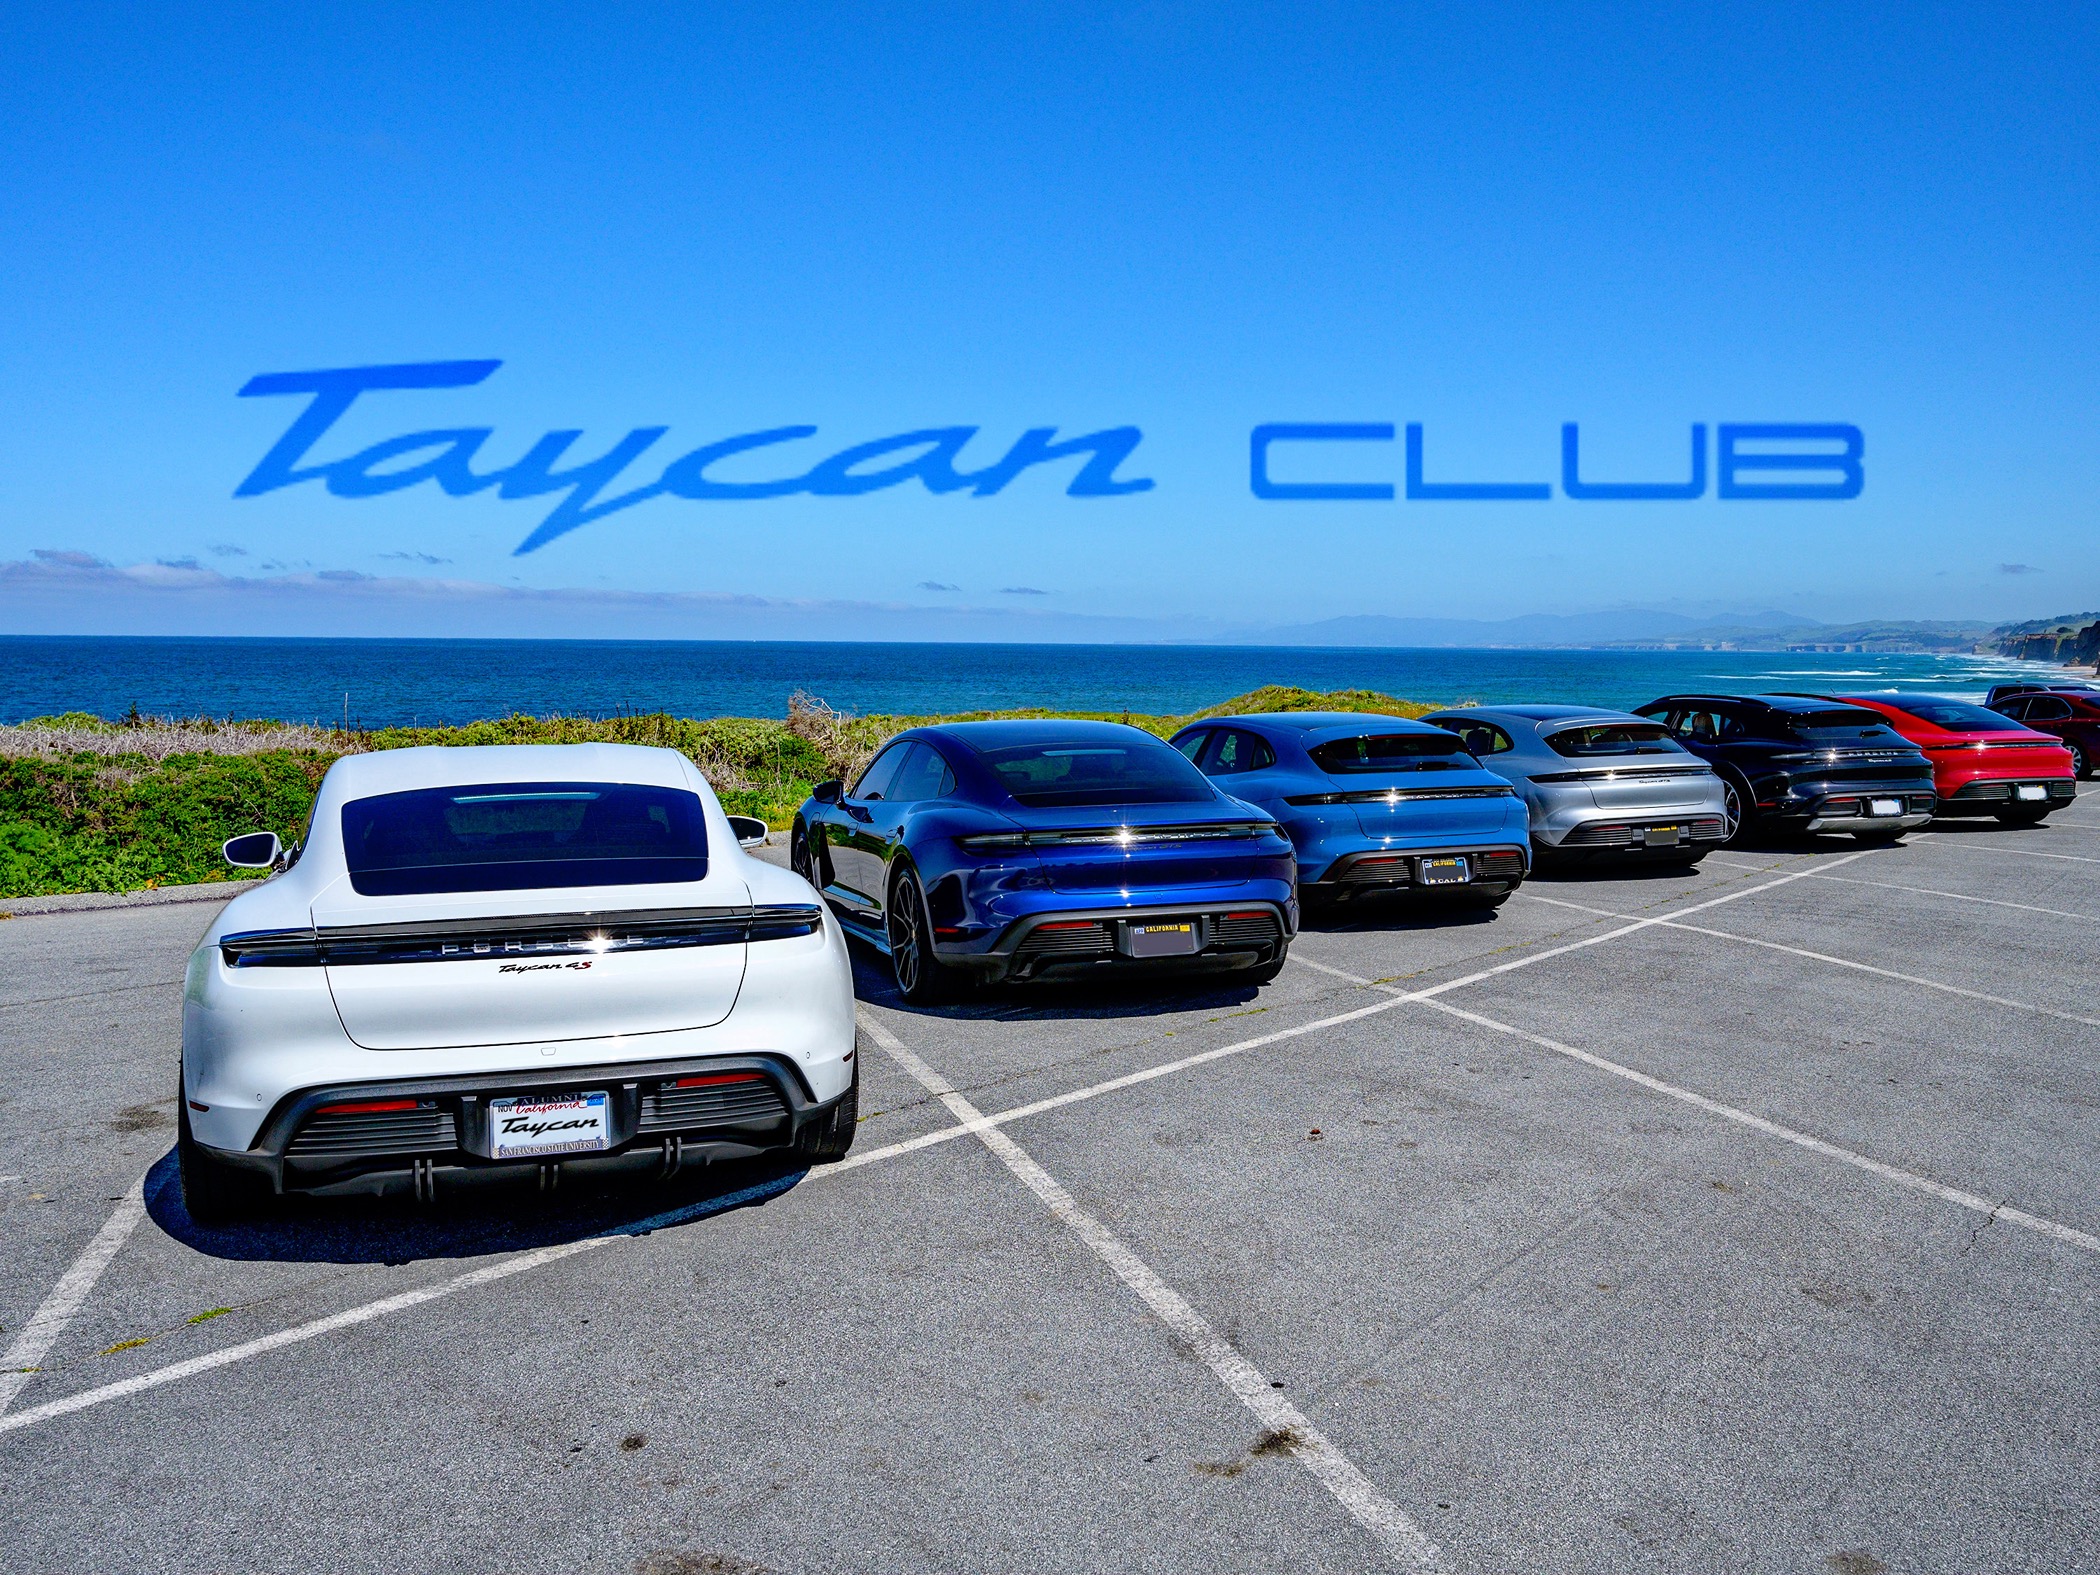 Porsche Taycan Is there any Taycan morning drive event in Bay Area CA? A4B98DB4-ABBD-466A-9AC0-9A747AB45826